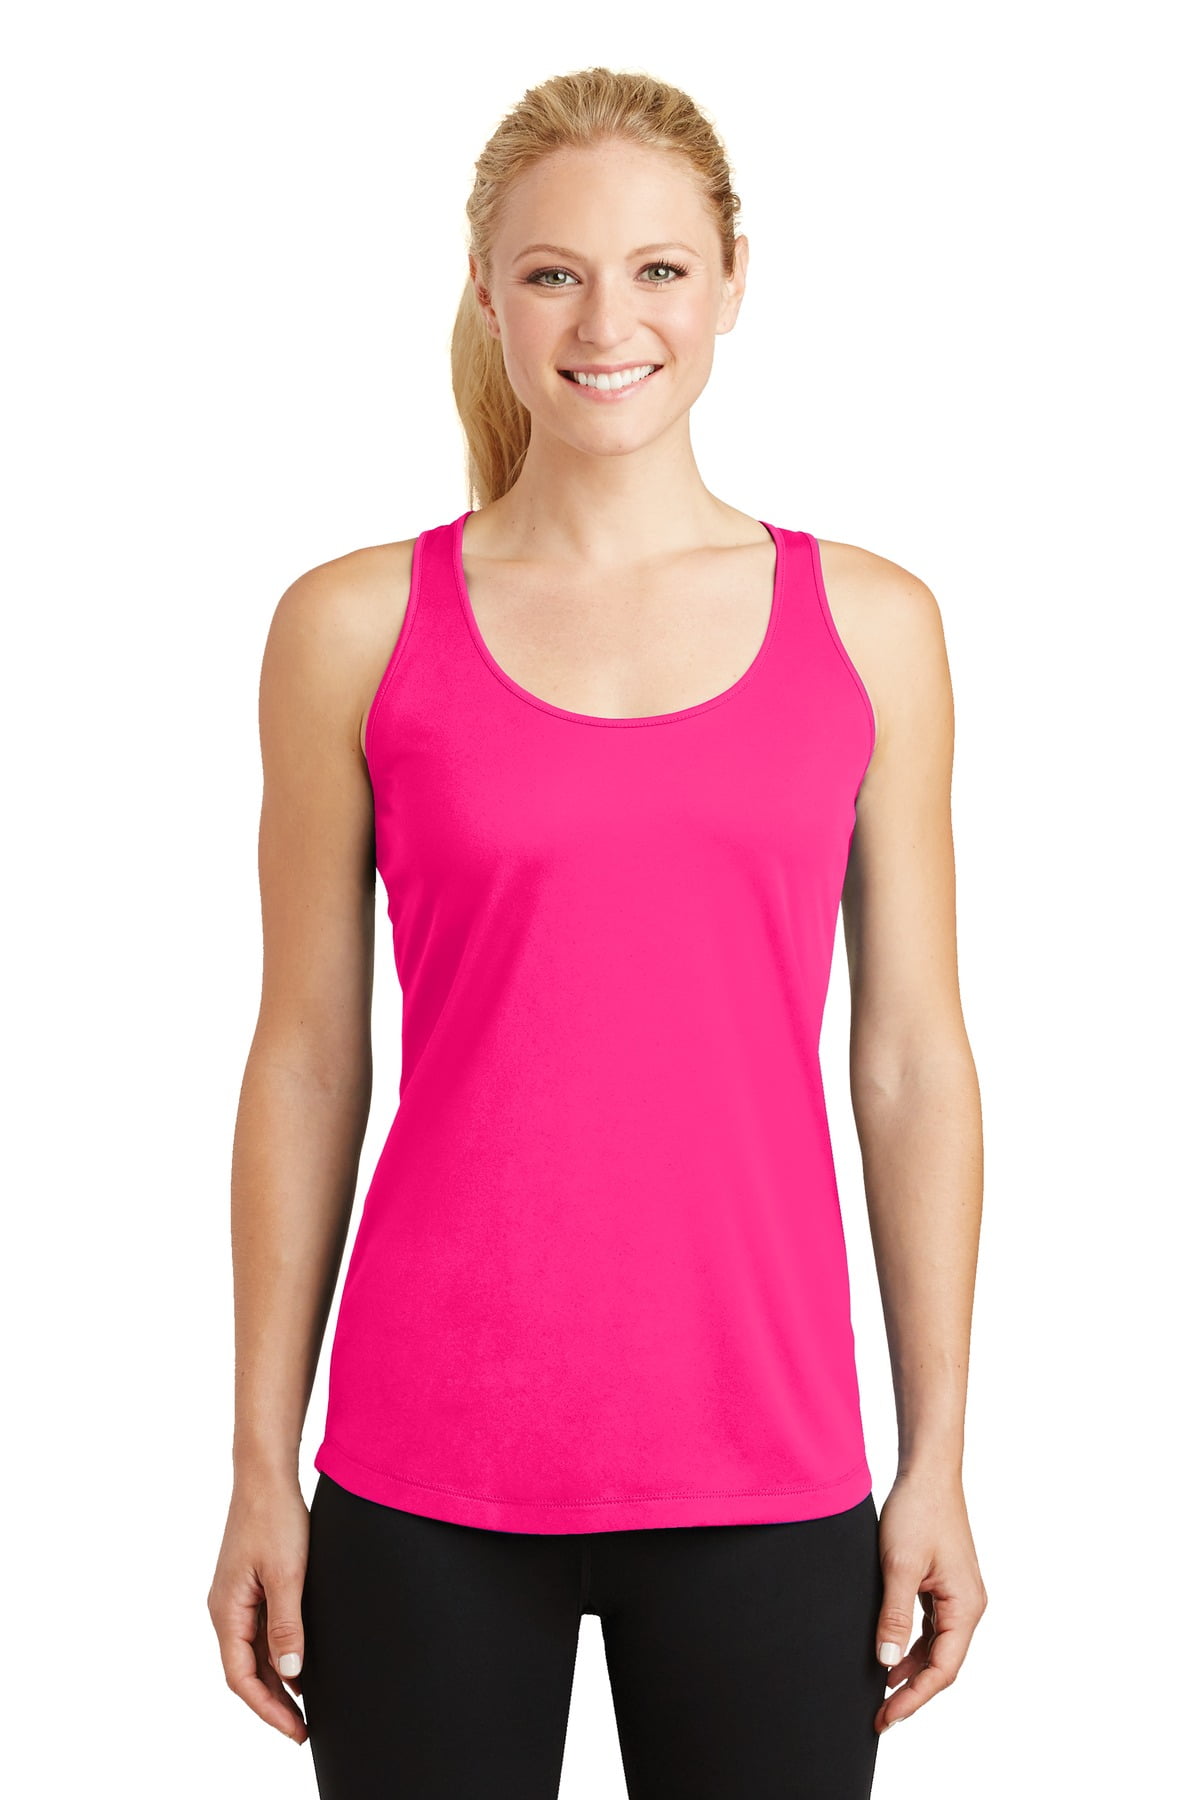 RBX Active Women's Sleeveless Athletic Running Workout Yoga Tank Top small